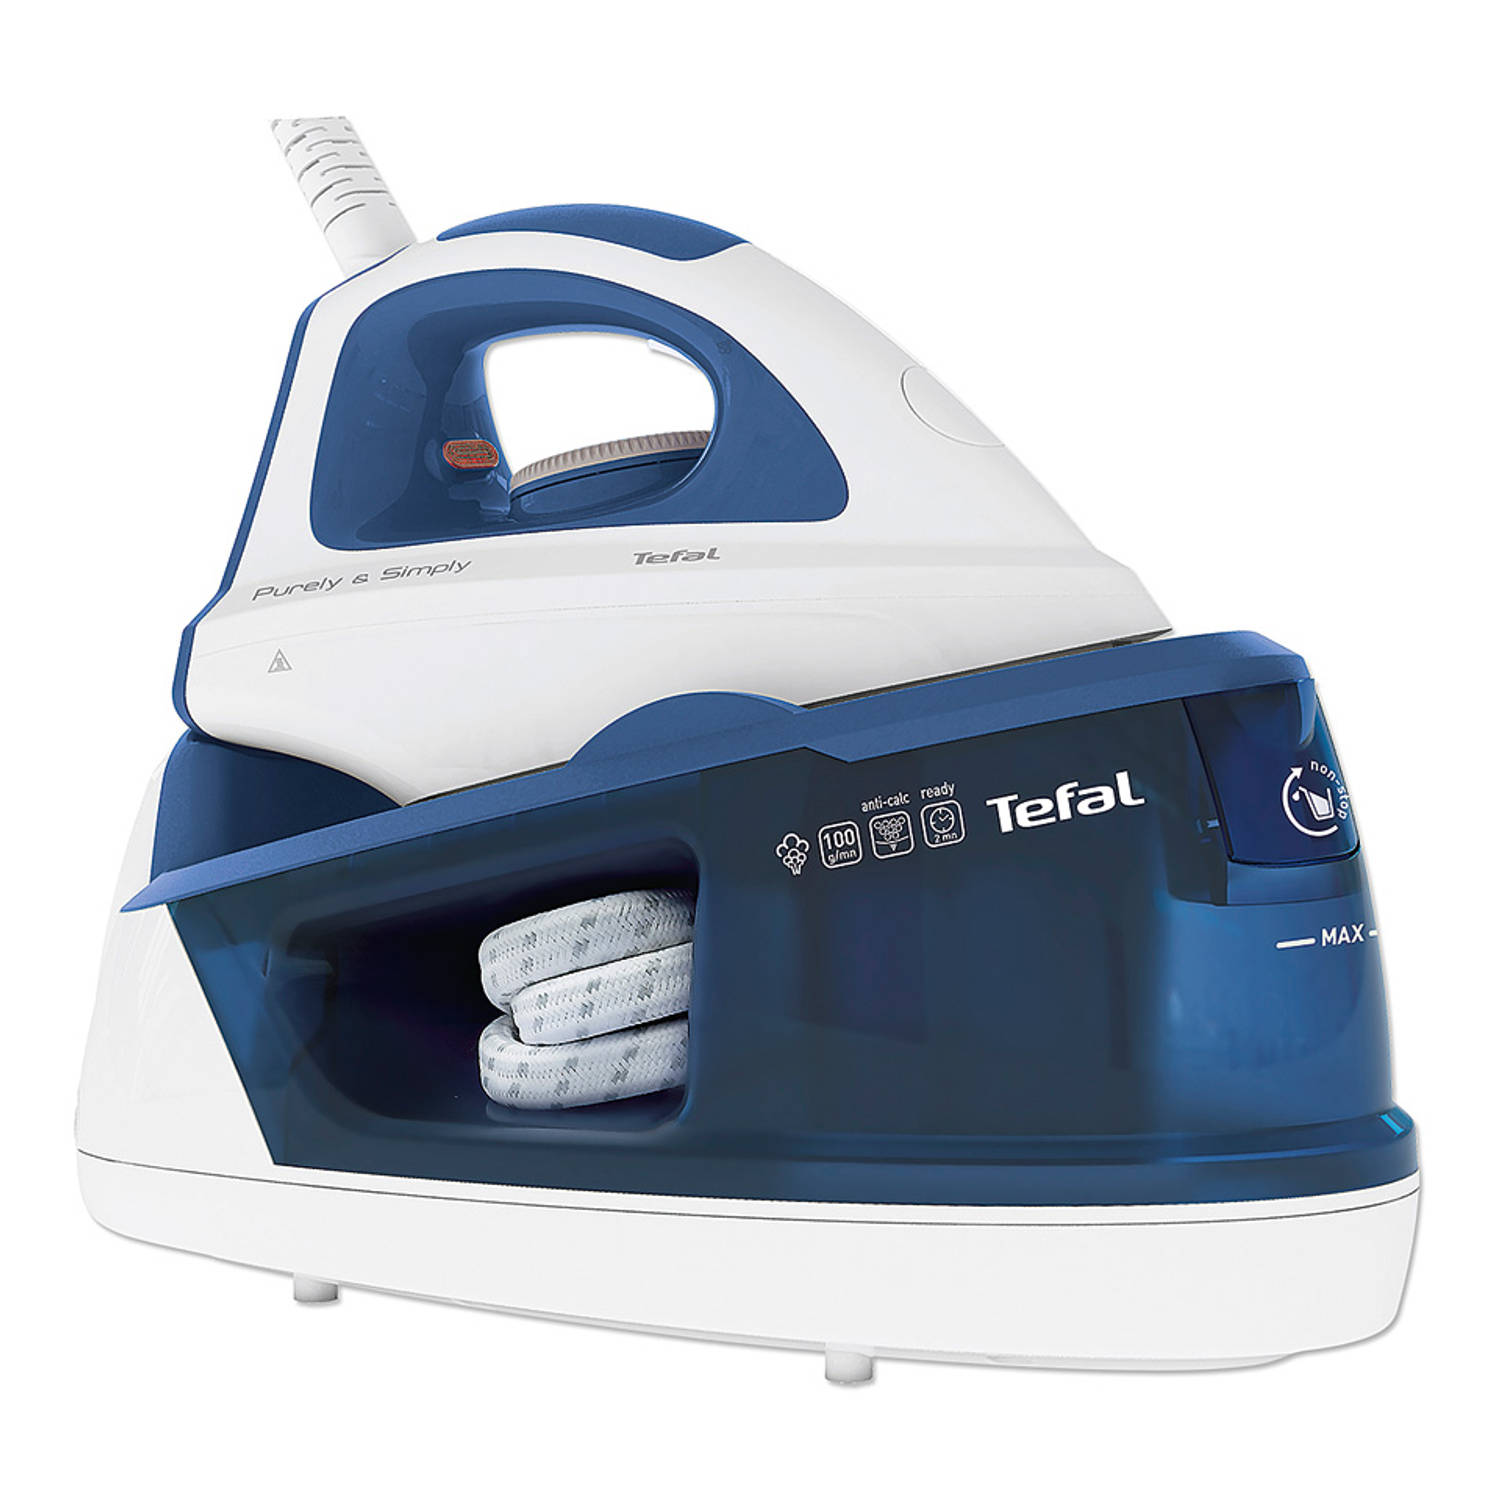 Tefal stoomgenerator Purely & Simply SV5030 |